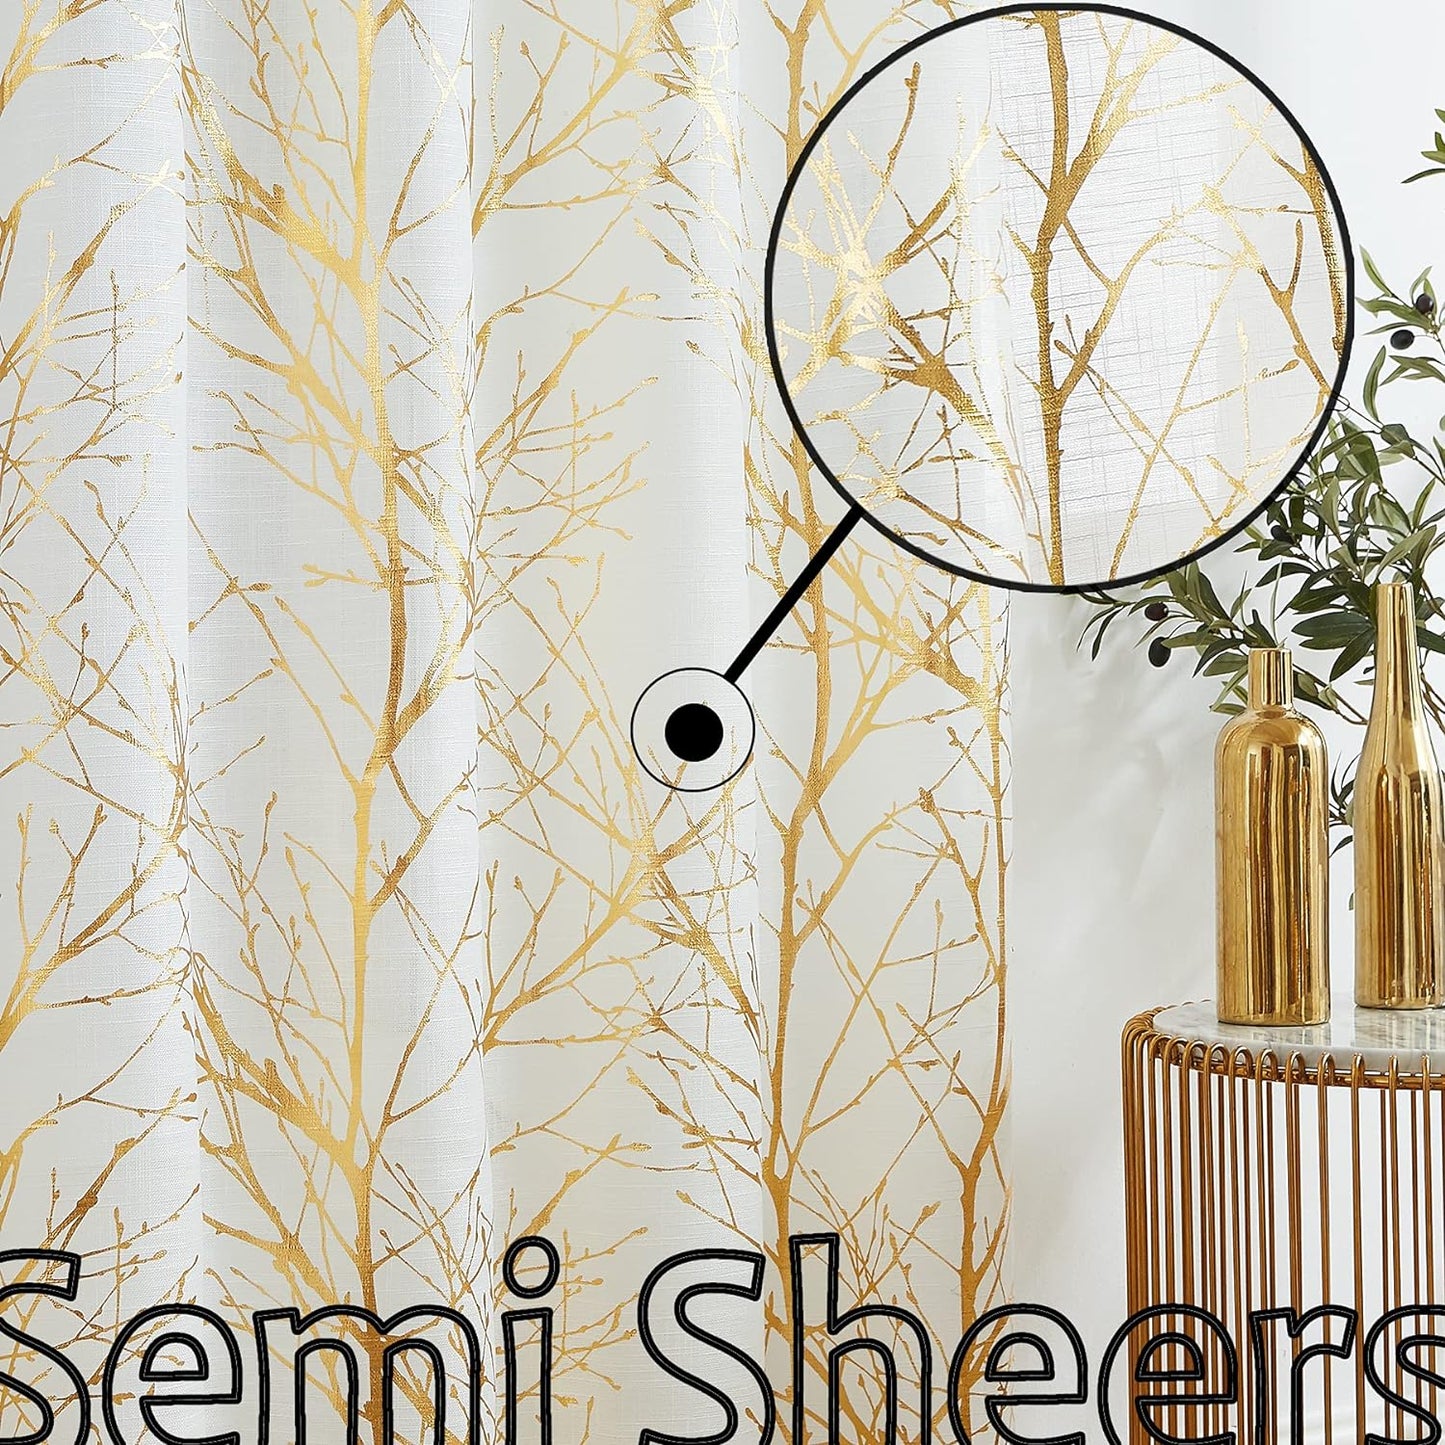 FMFUNCTEX Blue White Curtains for Kitchen Living Room 72“ Grey Tree Branches Print Curtain Set for Small Windows Linen Textured Semi-Sheer Drapes for Bedroom Grommet Top, 2 Panels  Fmfunctex Semi-Sheer: White + Foil Gold 50" X 84" |2Pcs 